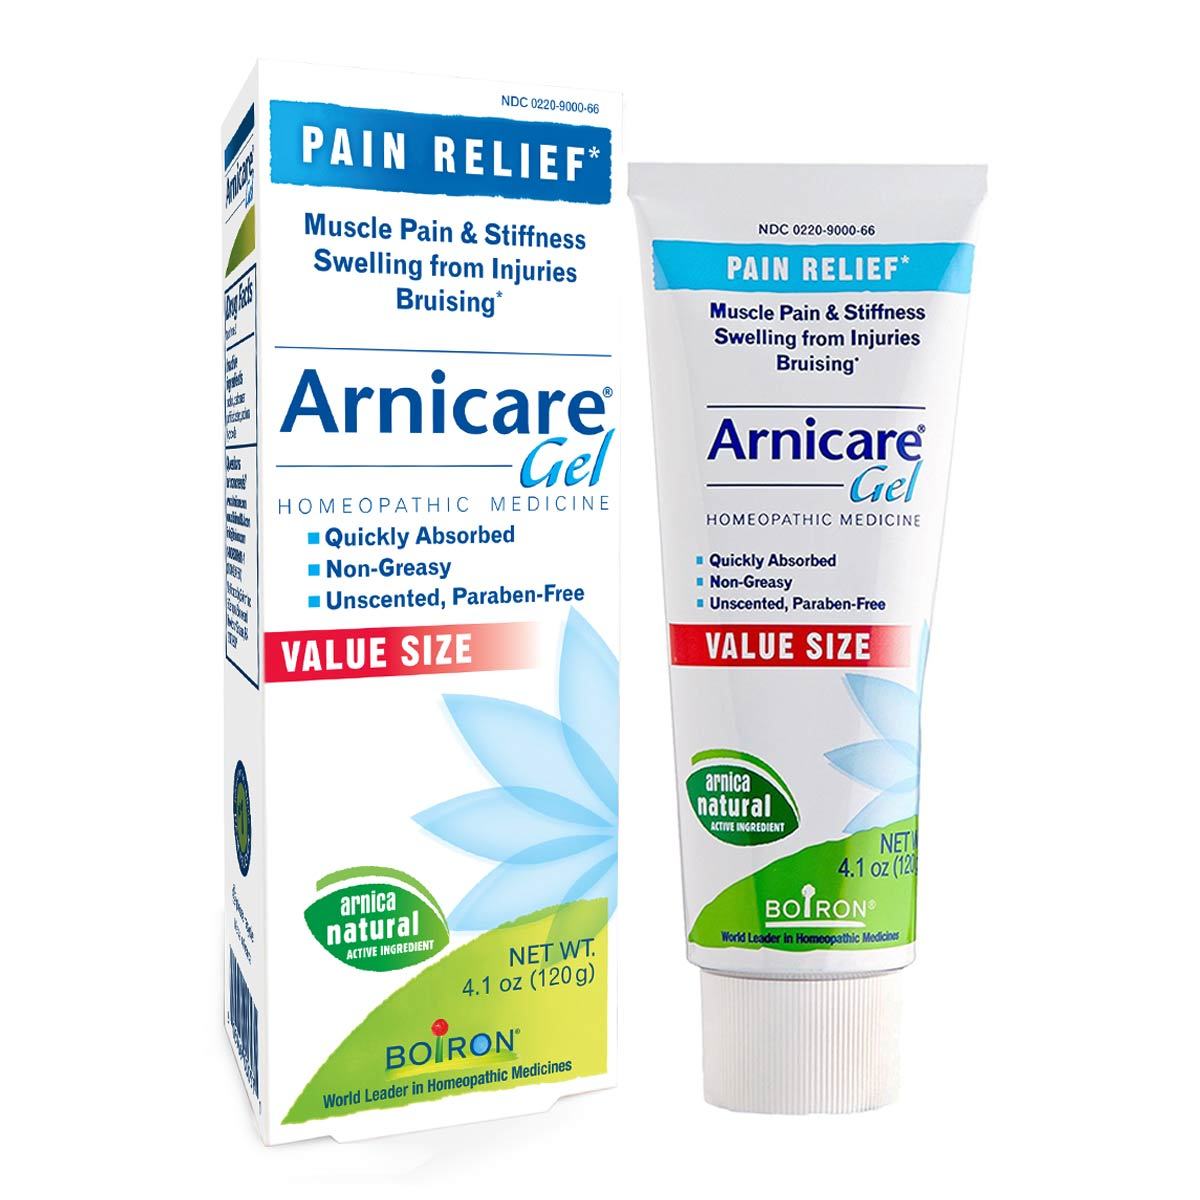 Primary image of Arnicare Gel